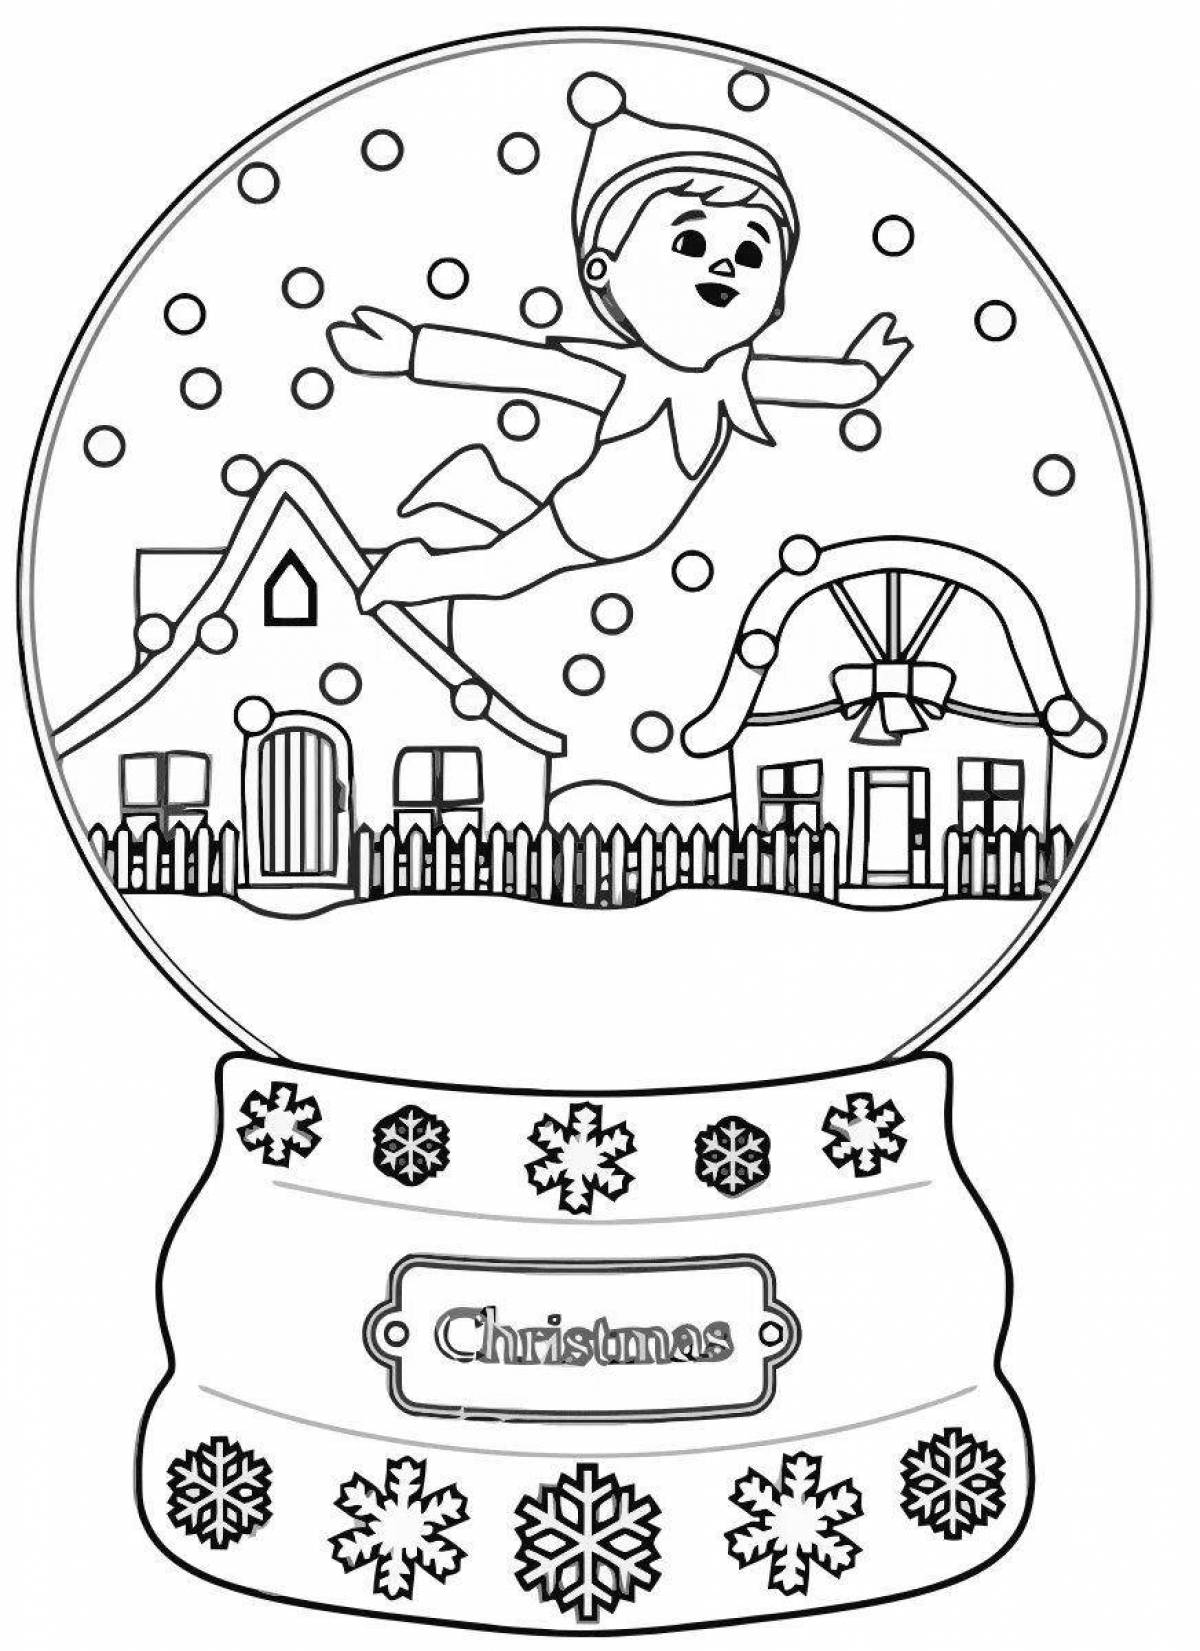 Fairytale winter ball coloring page